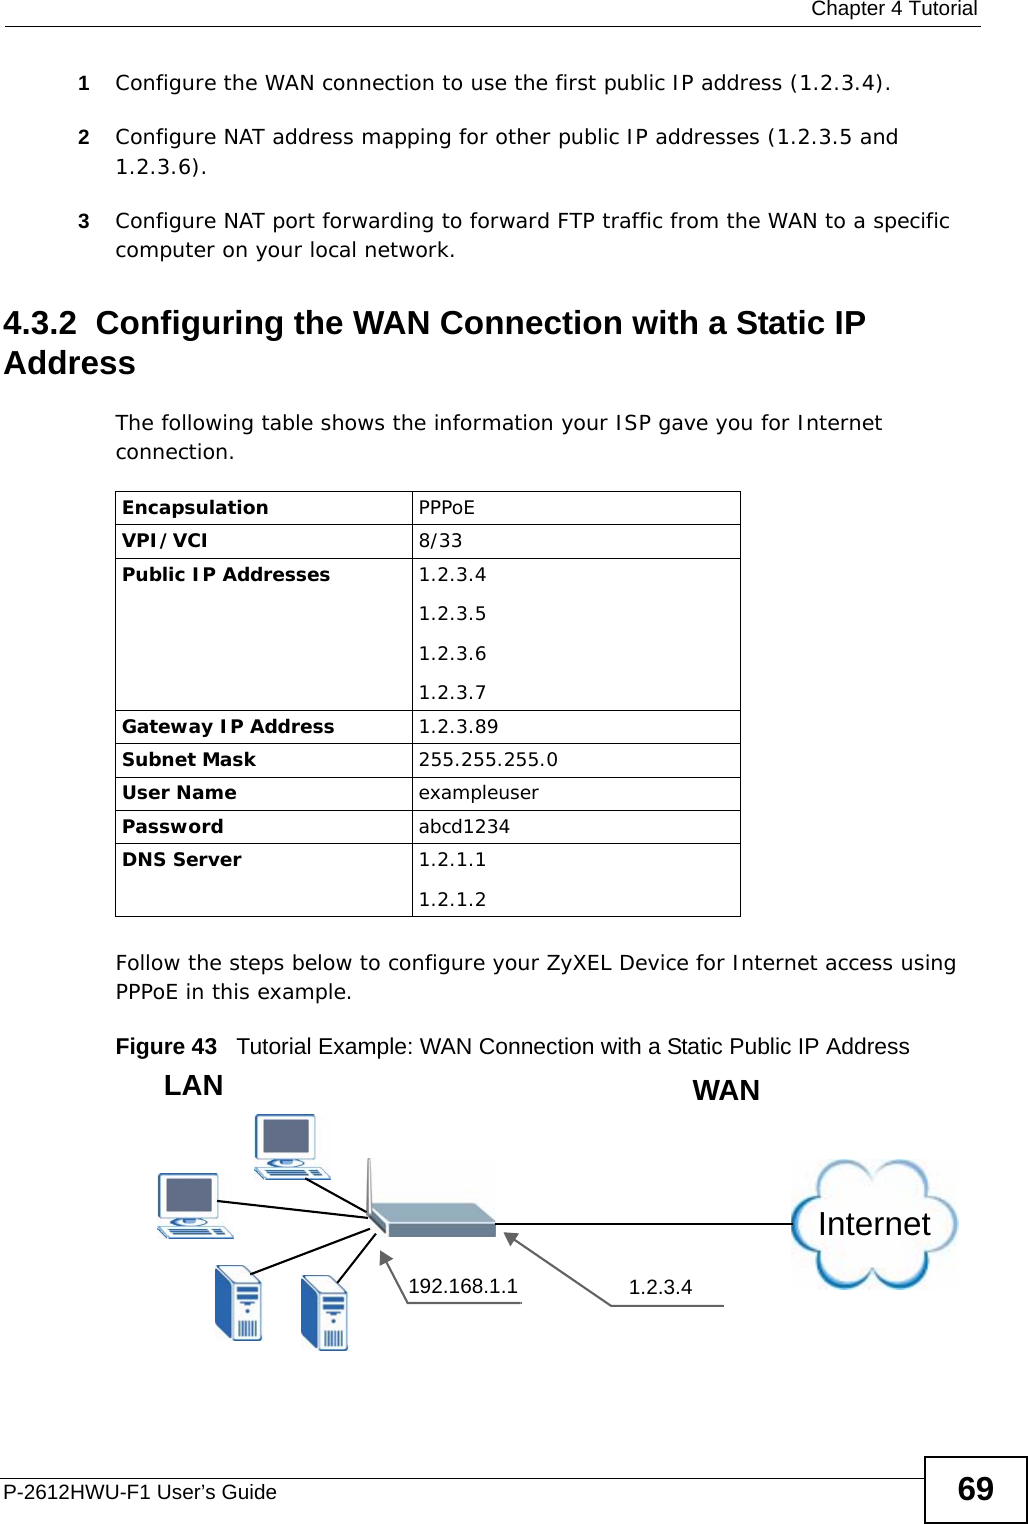  Chapter 4 TutorialP-2612HWU-F1 User’s Guide 691Configure the WAN connection to use the first public IP address (1.2.3.4).2Configure NAT address mapping for other public IP addresses (1.2.3.5 and 1.2.3.6).3Configure NAT port forwarding to forward FTP traffic from the WAN to a specific computer on your local network.4.3.2  Configuring the WAN Connection with a Static IP AddressThe following table shows the information your ISP gave you for Internet connection.  Follow the steps below to configure your ZyXEL Device for Internet access using PPPoE in this example.Figure 43   Tutorial Example: WAN Connection with a Static Public IP Address Encapsulation PPPoEVPI/VCI 8/33Public IP Addresses 1.2.3.4 1.2.3.51.2.3.61.2.3.7Gateway IP Address 1.2.3.89Subnet Mask 255.255.255.0User Name exampleuserPassword abcd1234DNS Server 1.2.1.11.2.1.2Internet192.168.1.1 1.2.3.4WANLAN